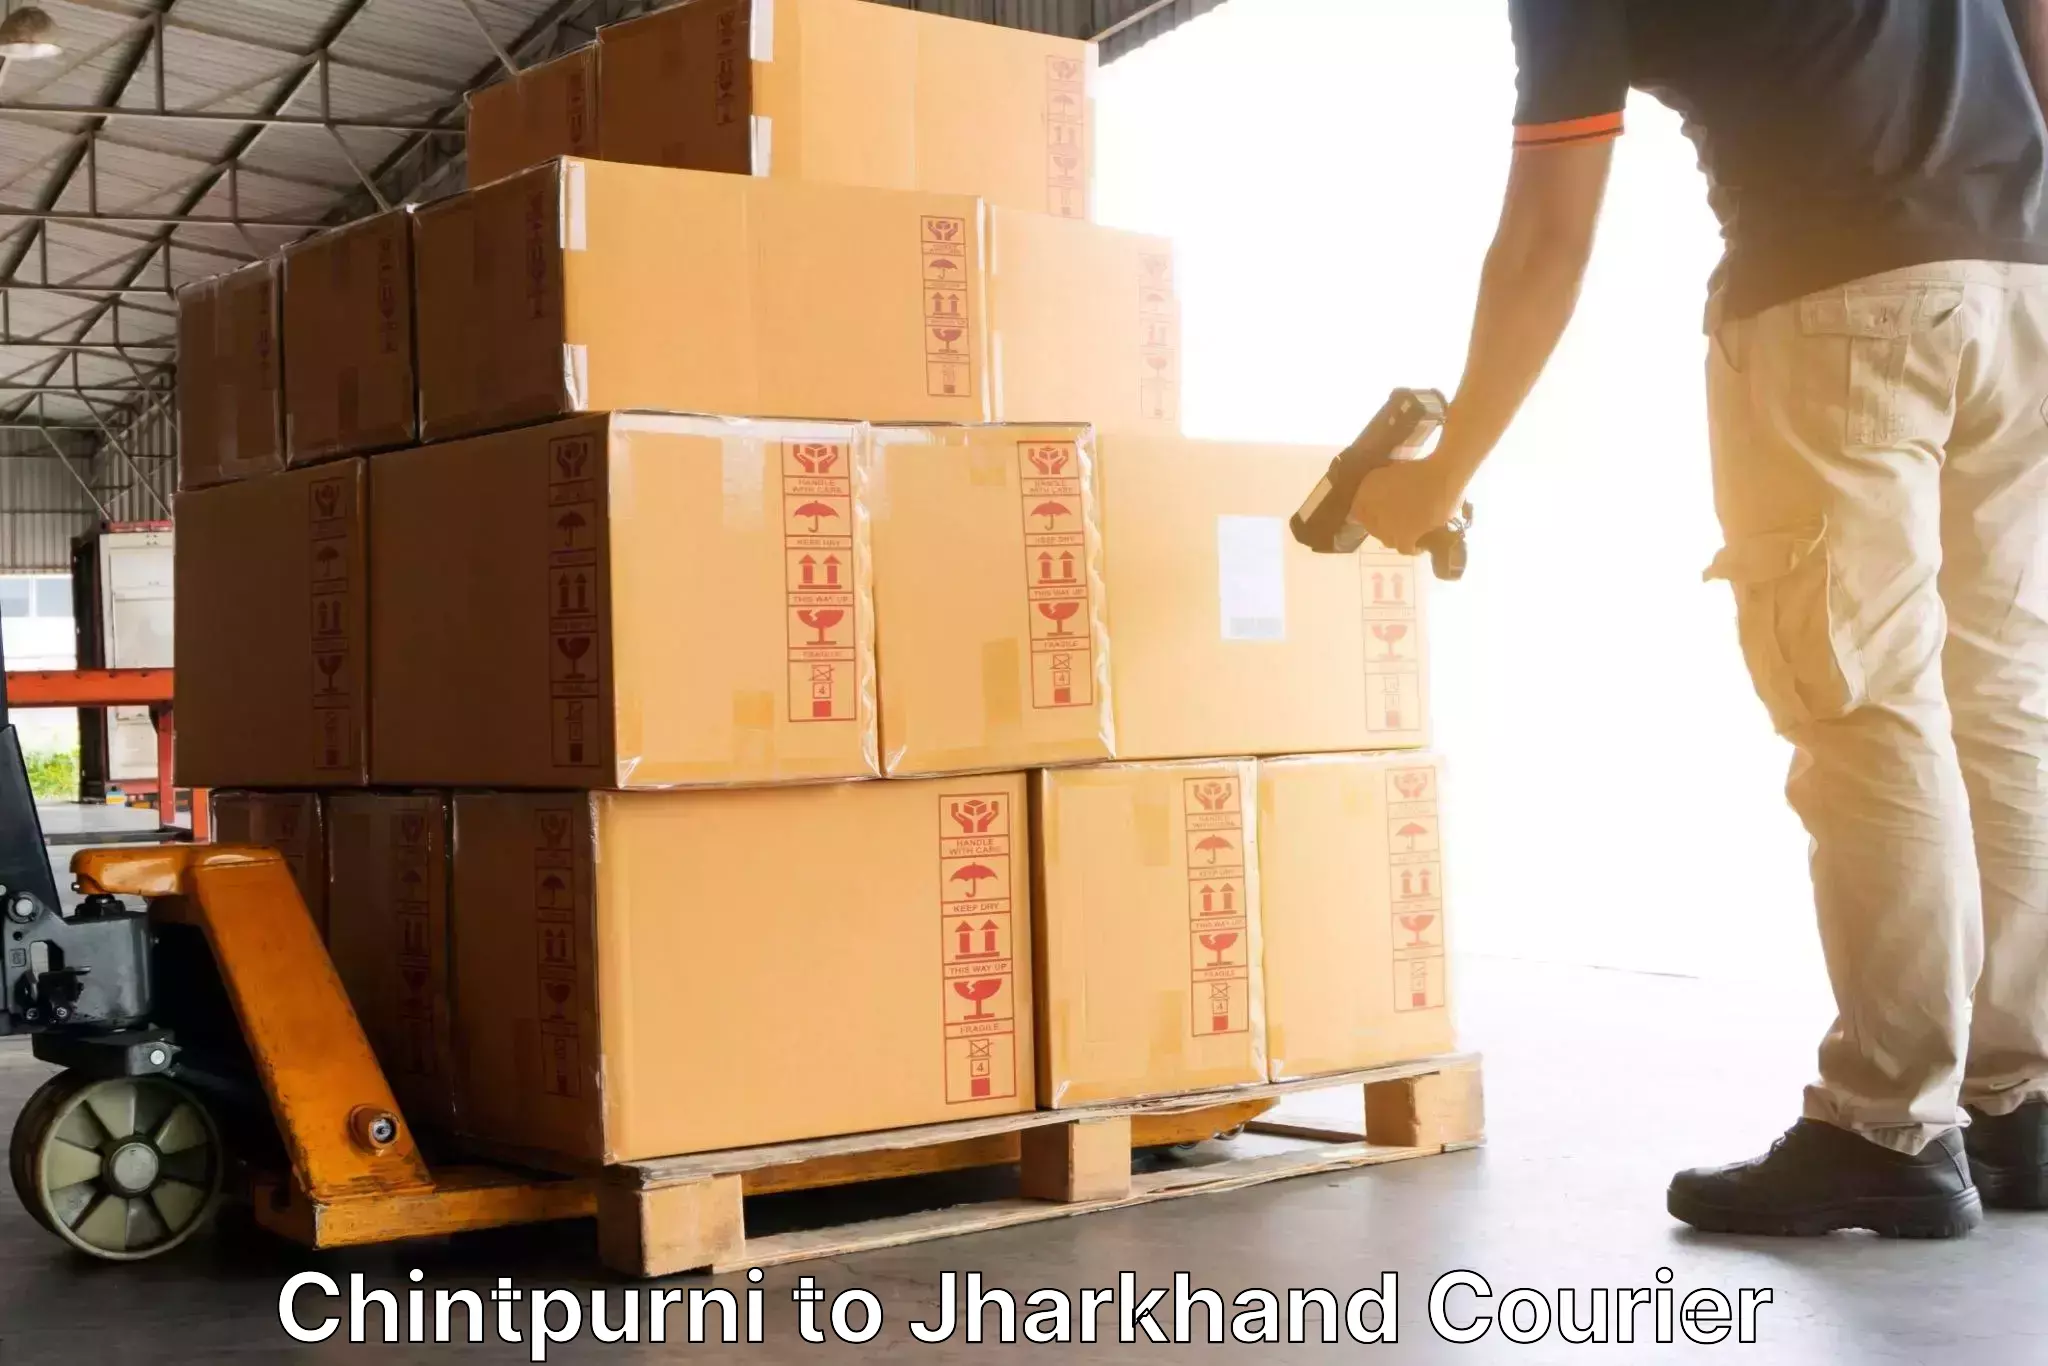 Flexible delivery schedules Chintpurni to Isri